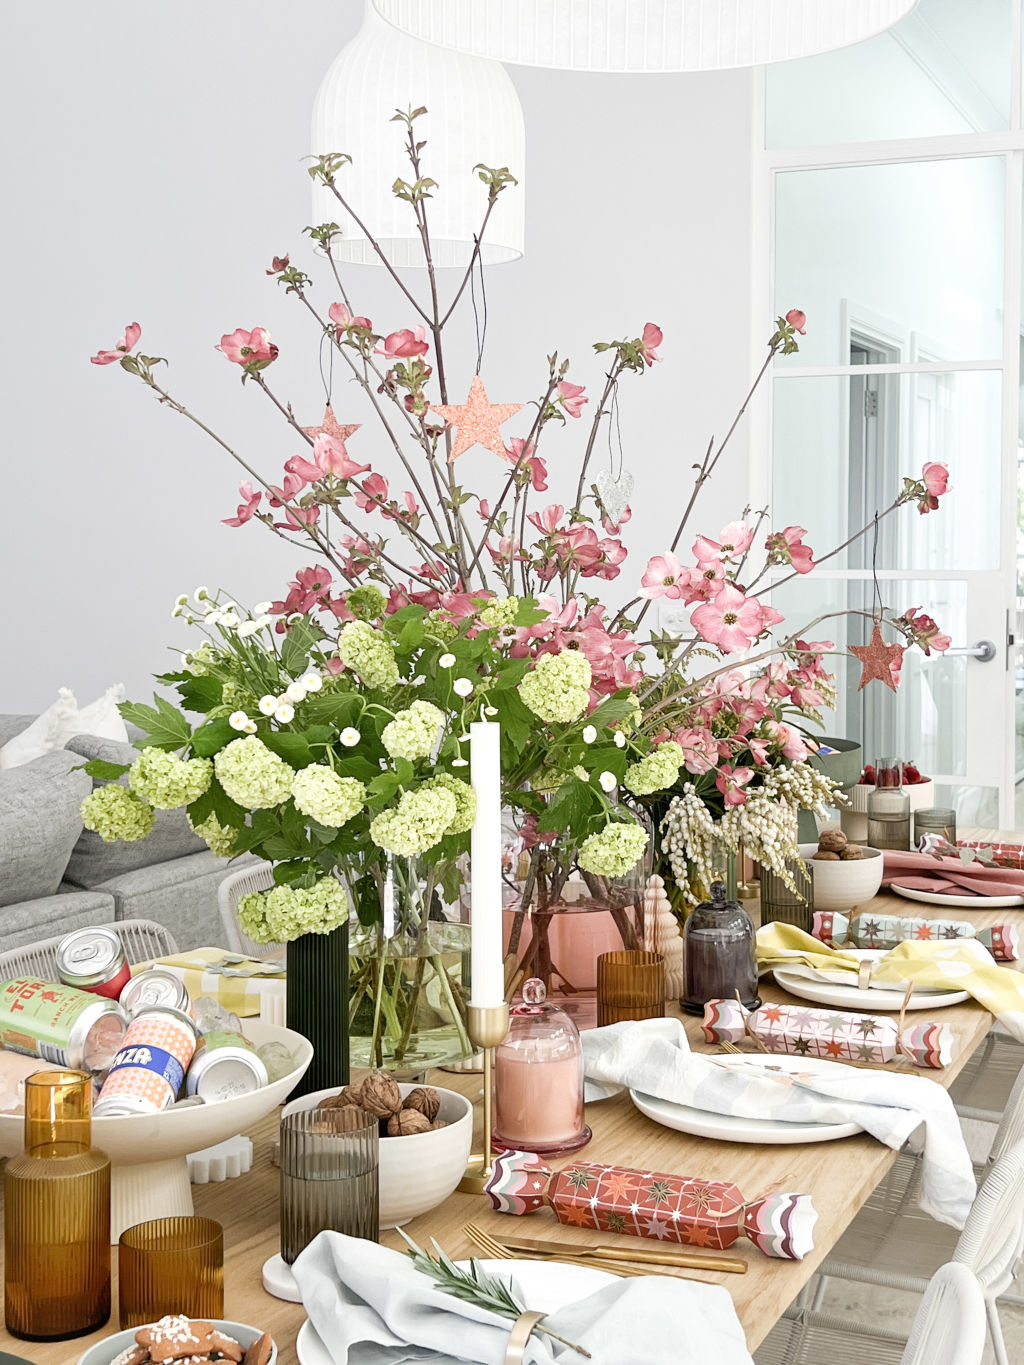 Setting the table is the perfect opportunity to be creative, Kate Gordon from Robert Gordon says. Photo: Norsu